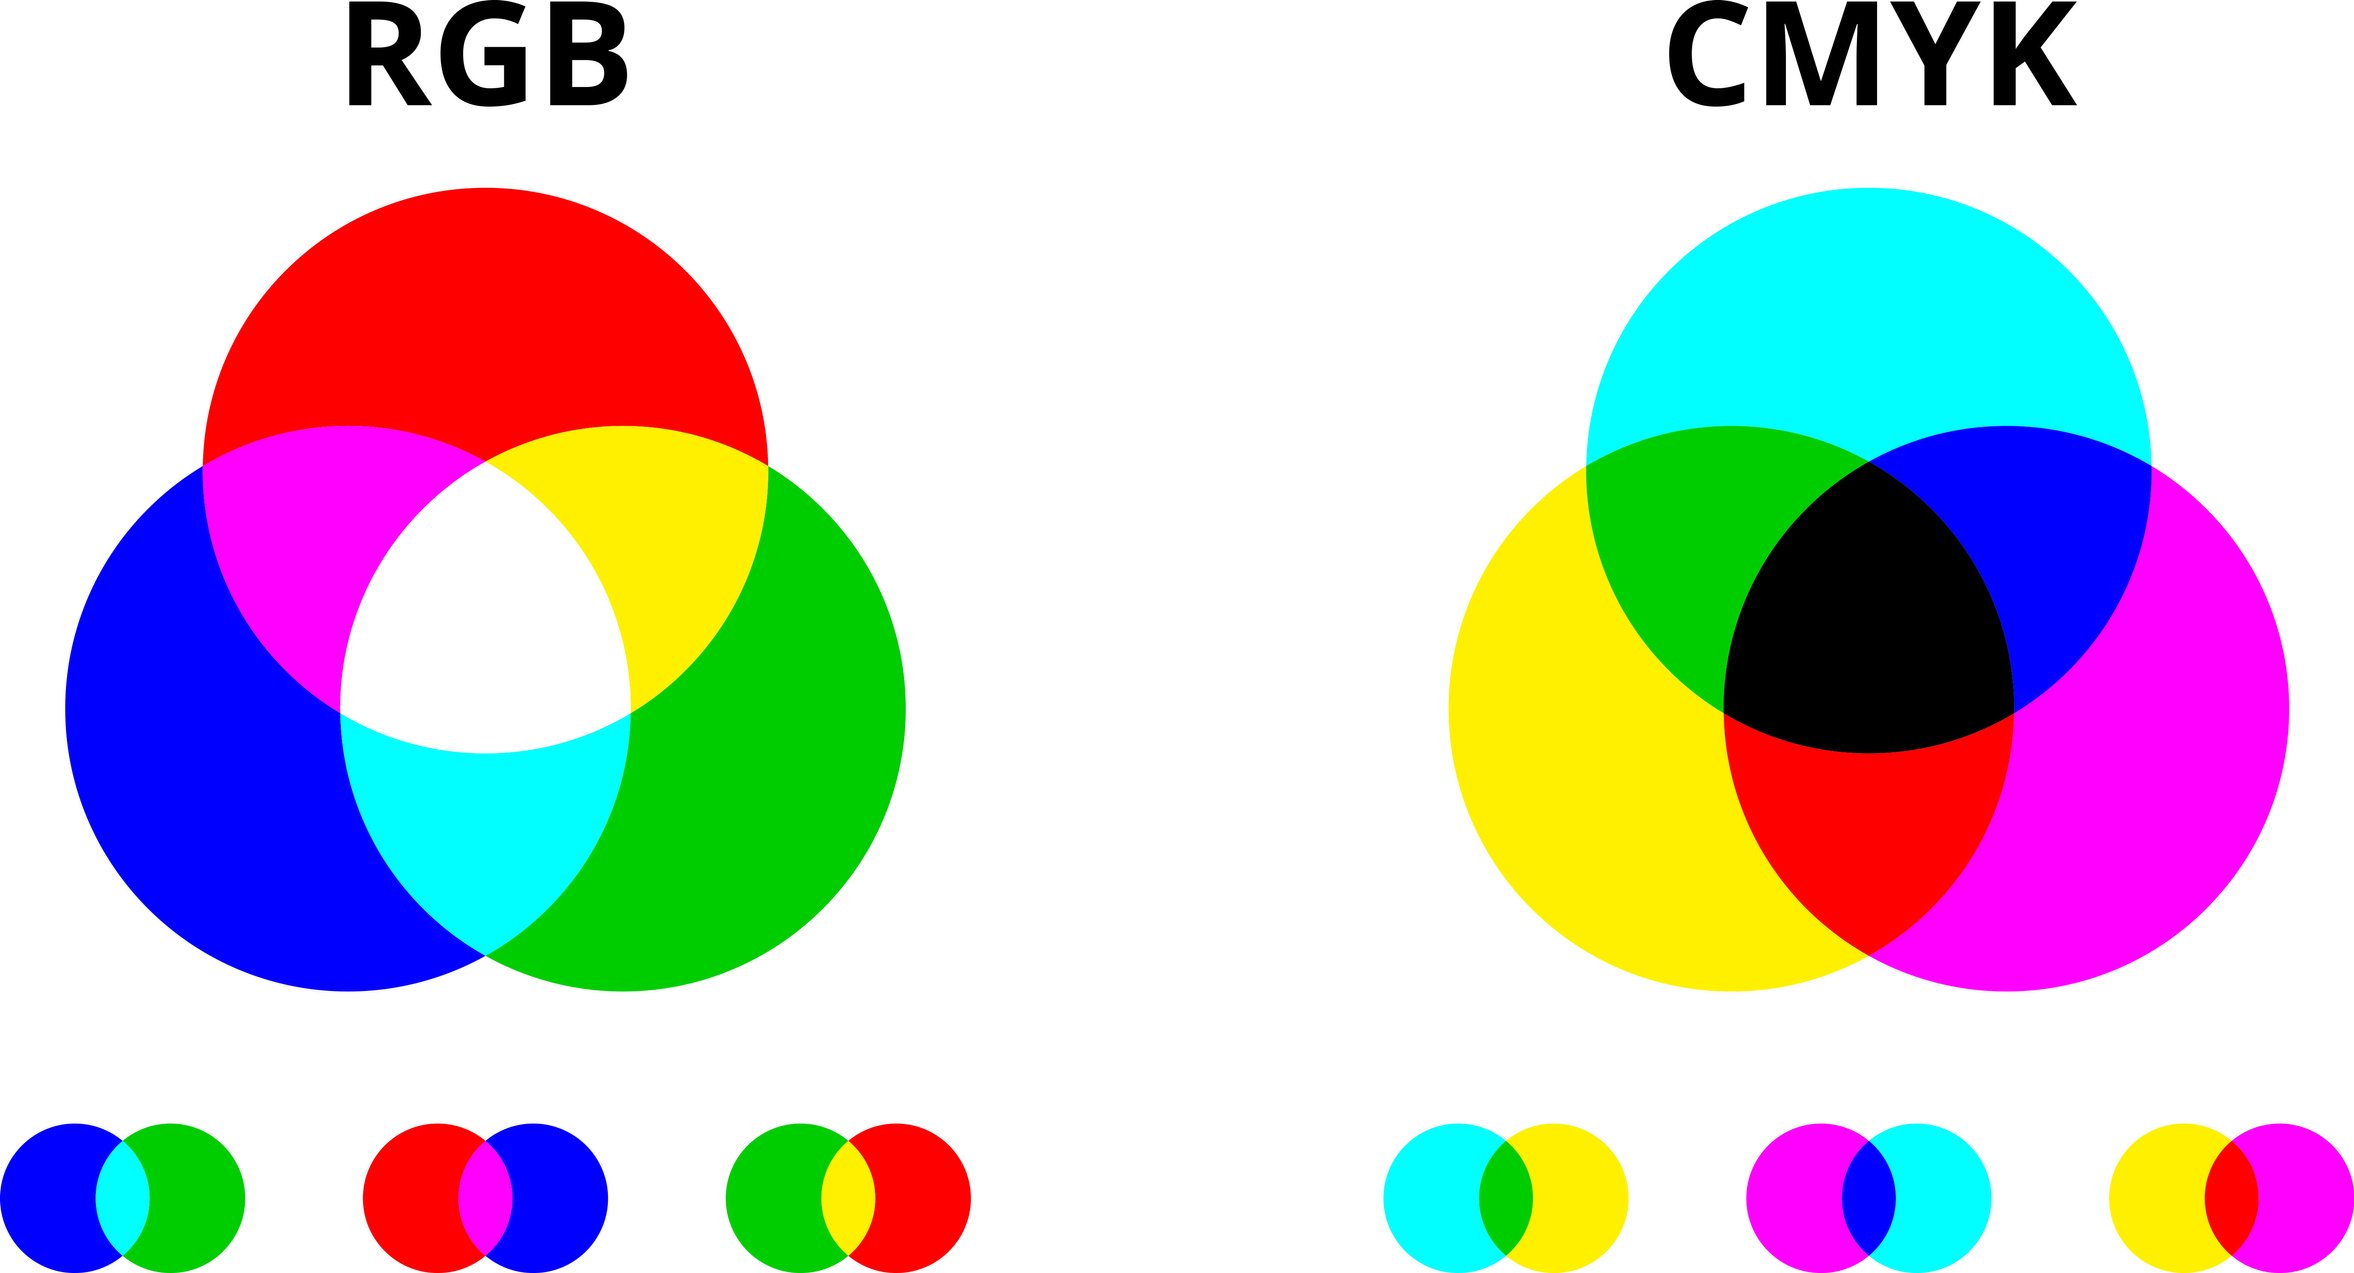 Matematisk bande os selv CMYK Printing vs. RGB: How to Print the Right Colors